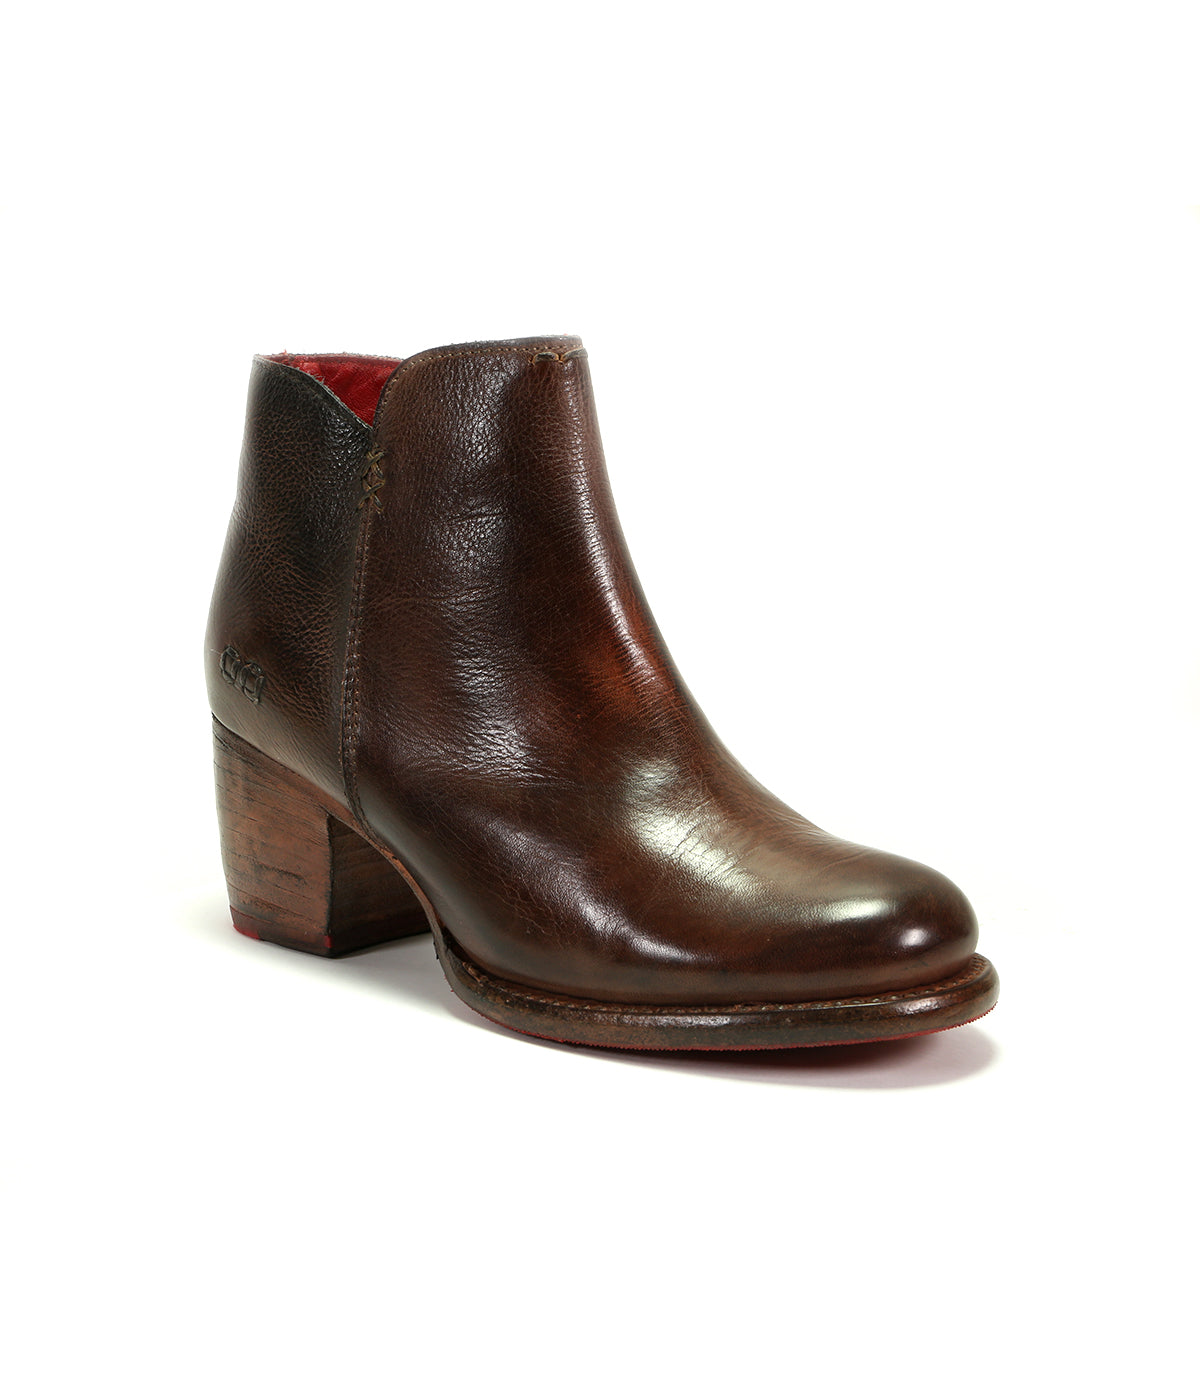 A durable, handmade women's brown leather ankle boot with a wooden heel, the Yell by Bed Stu.